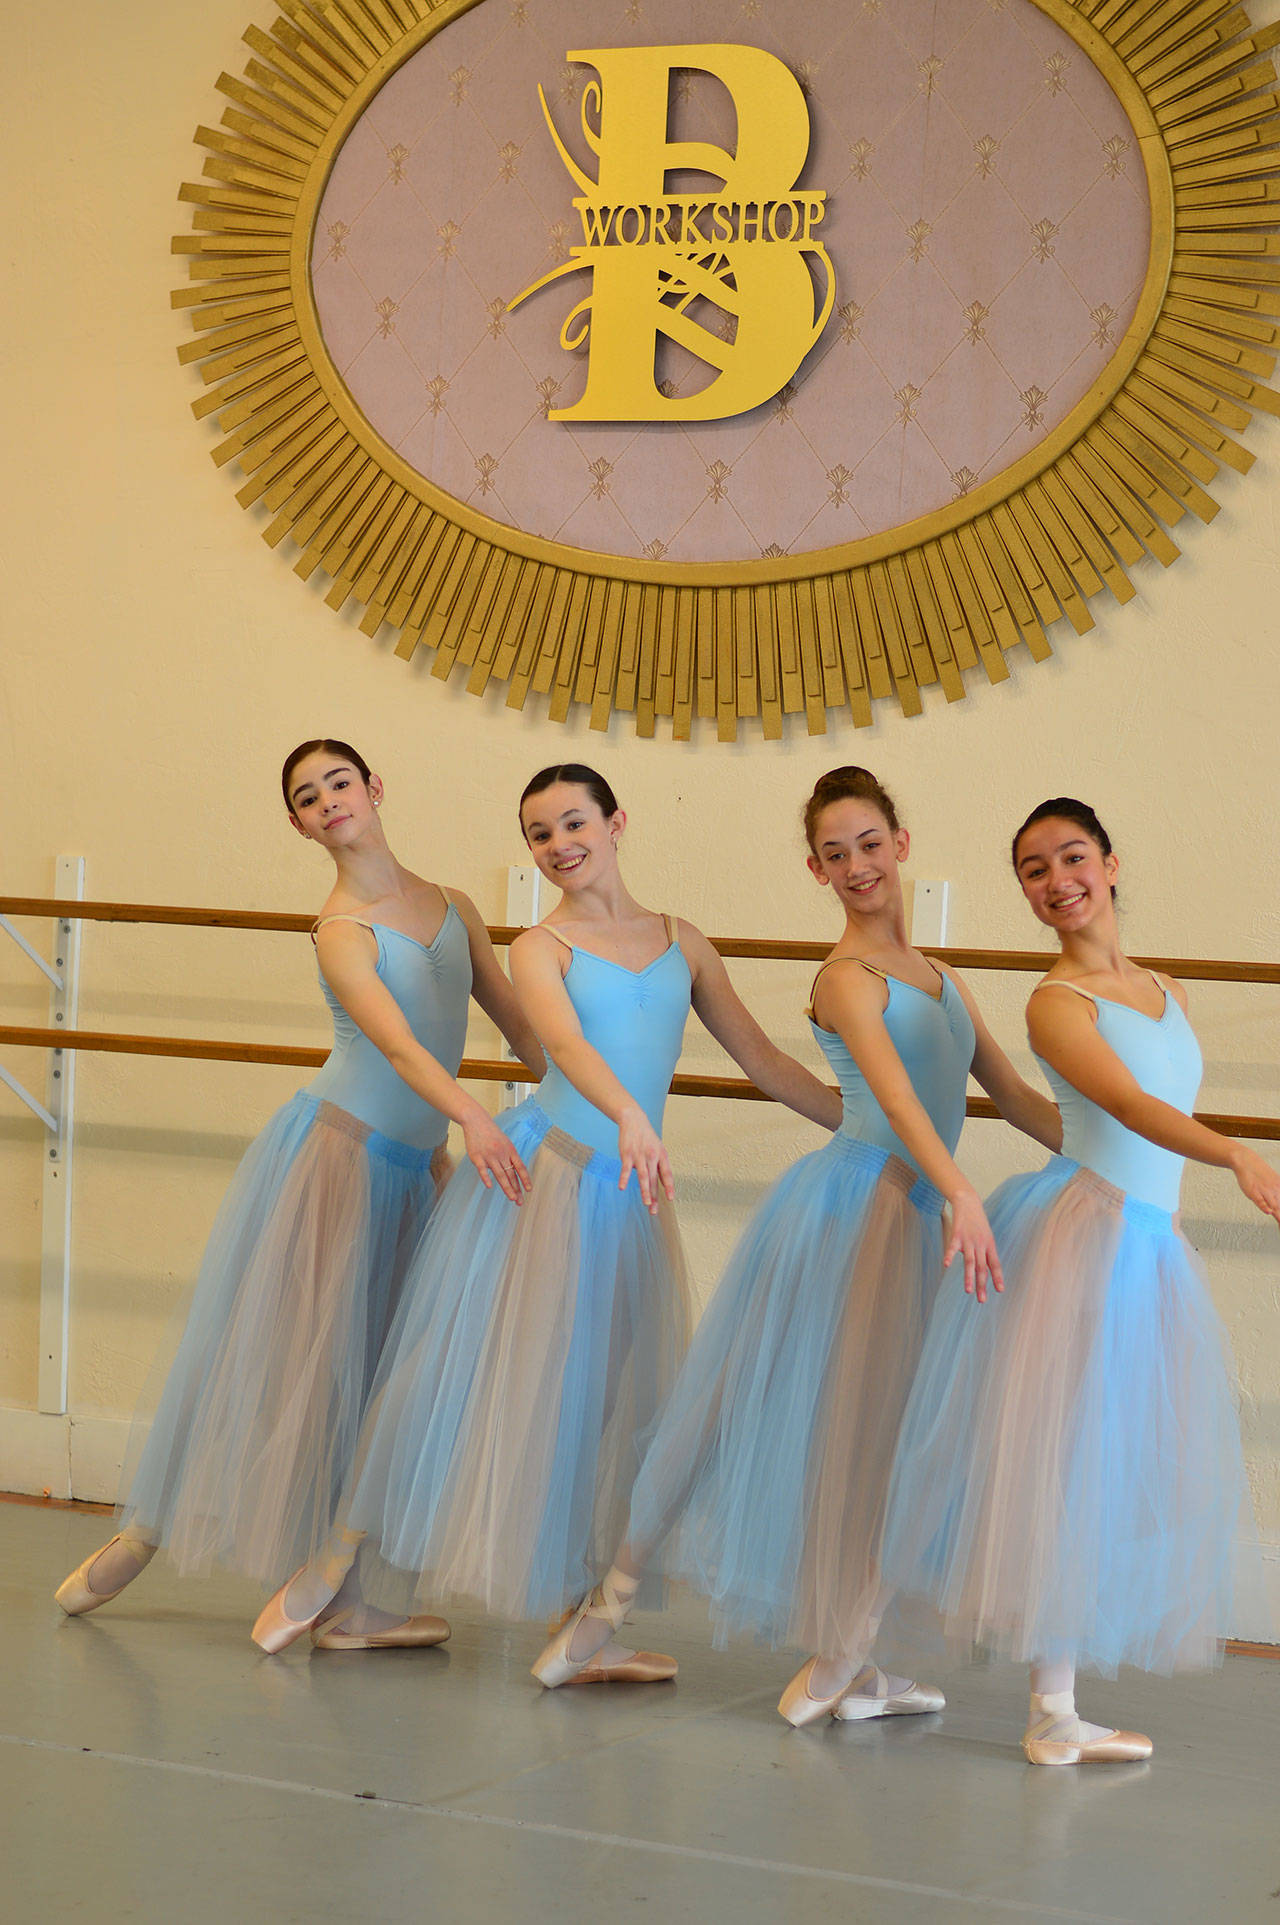 The Ballet Workshop’s accomplished dancers include, from left, Ava Johnson, Courtney Smith, Kim Braun and Isabella Knott. (Diane Urbani de la Paz/for Peninsula Daily News)